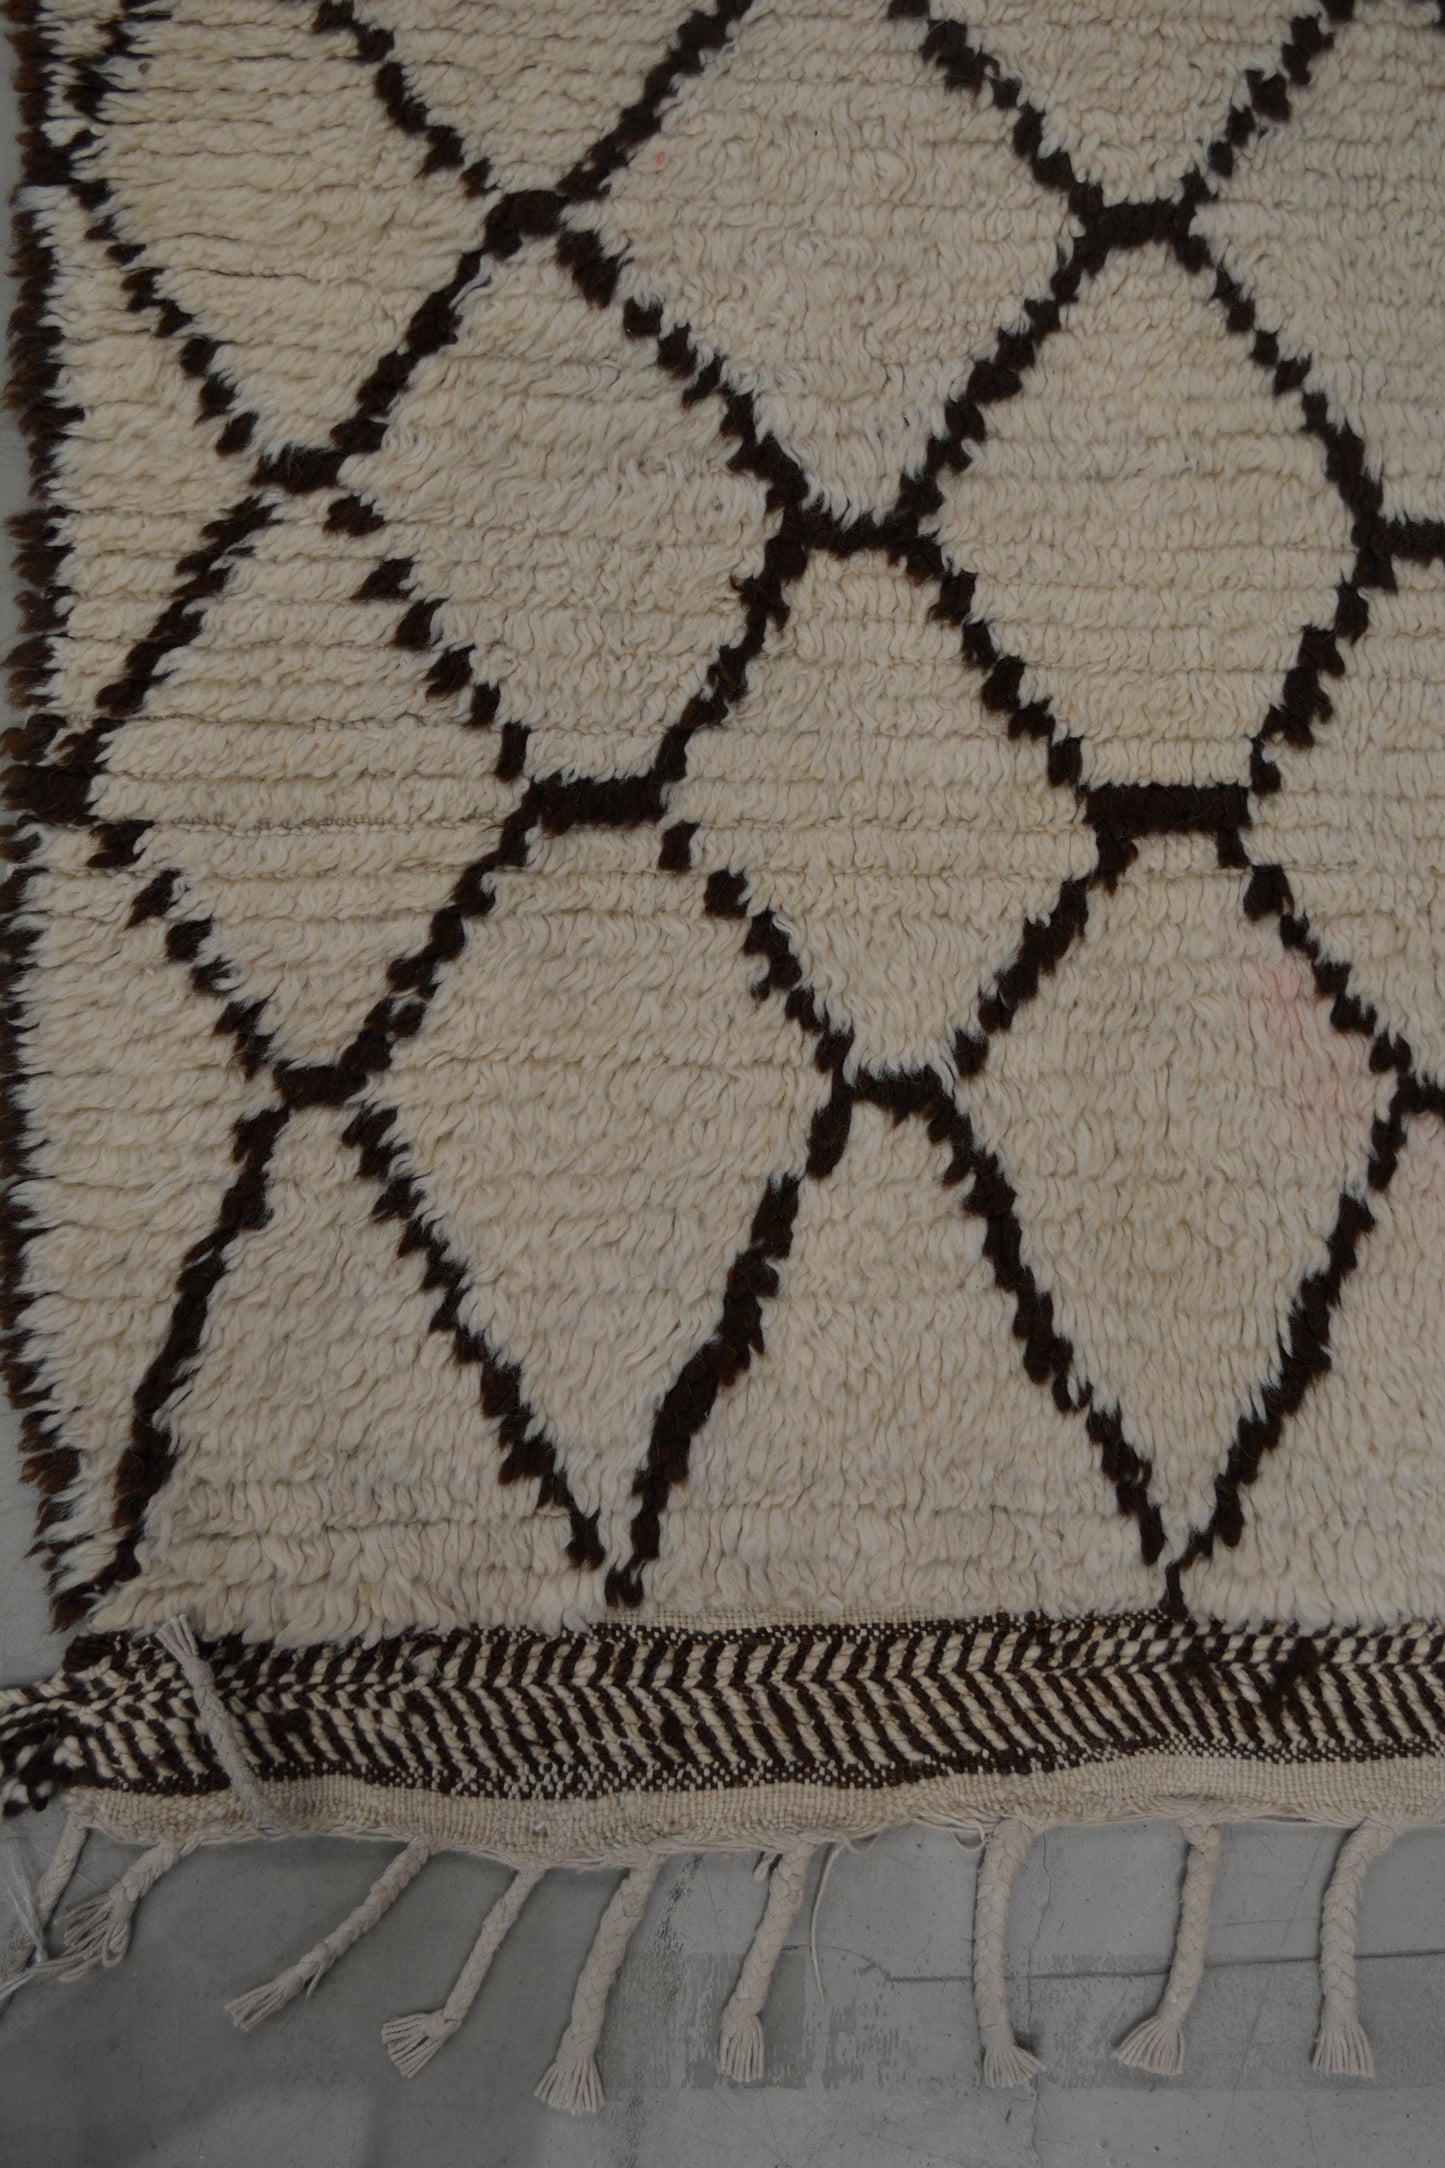 on the bottom there are fringes and a thin border with a diagonal lines pattern.